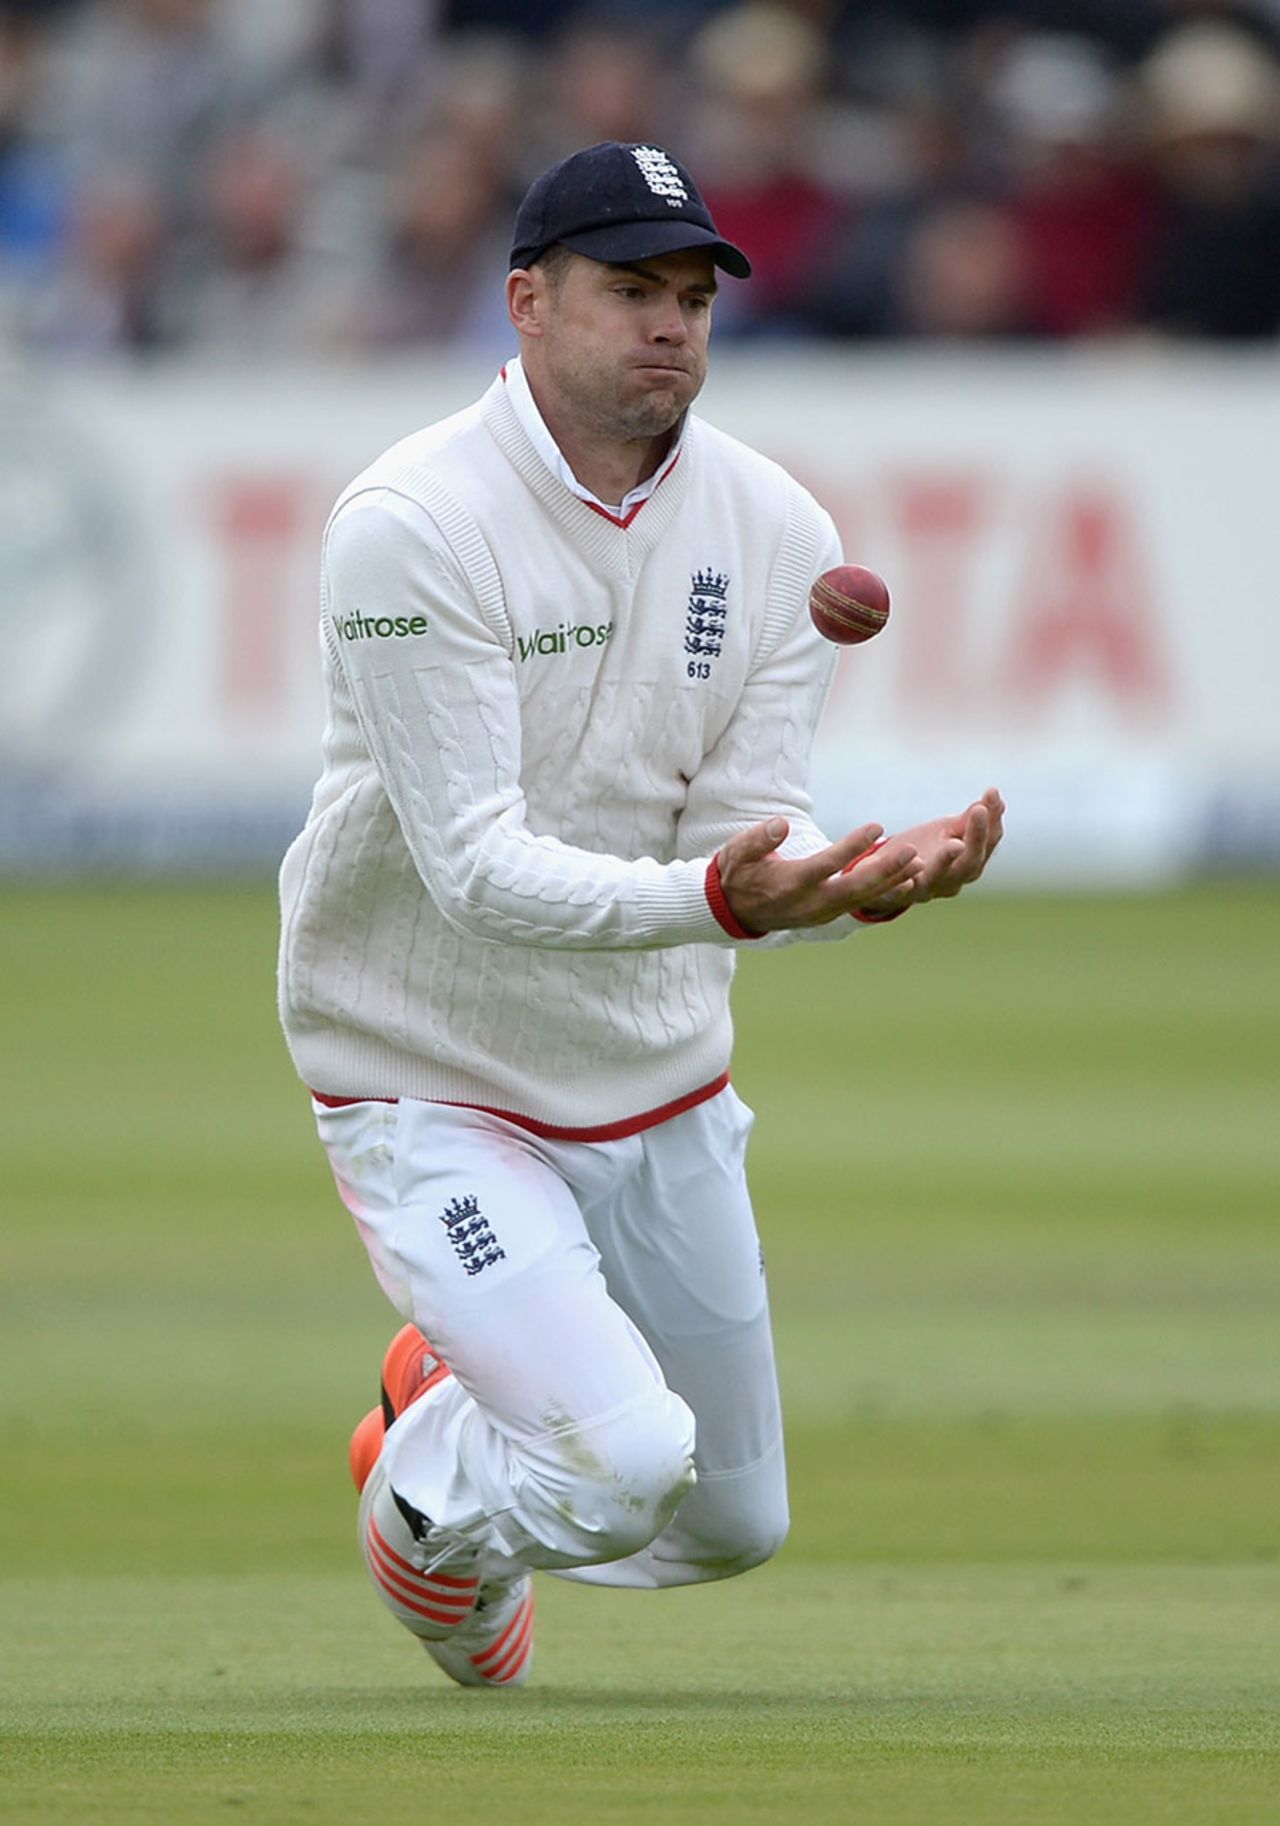 James Anderson juggled his catch but held on to end the innings, England v New Zealand, 1st Investec Test, Lord's, 3rd day, May 23, 2015